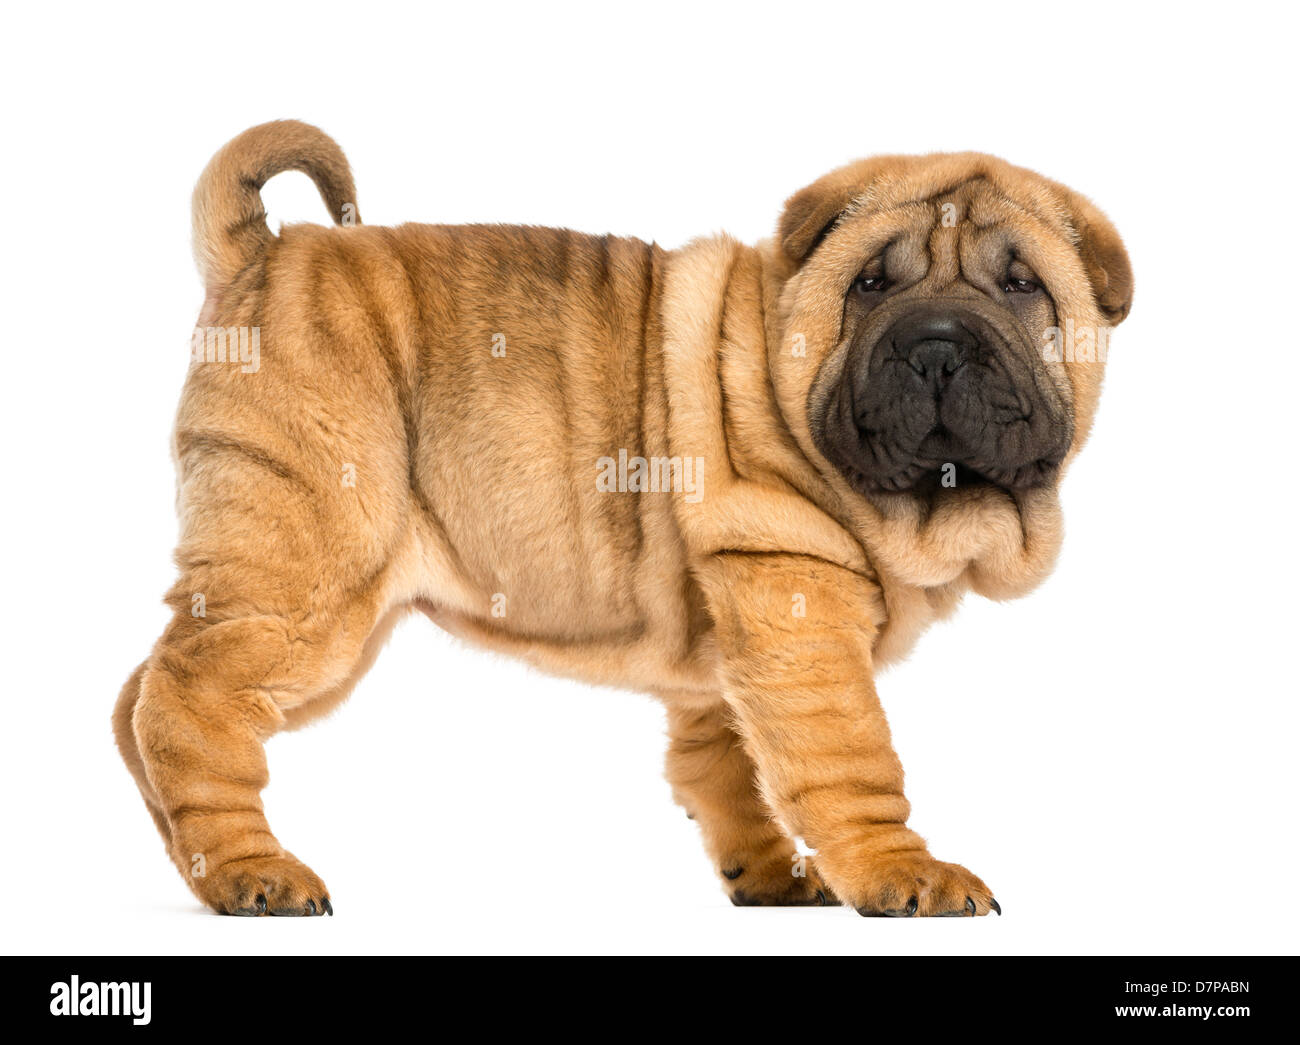 Shar pei puppy, 11 weeks old, standing against white background Stock Photo